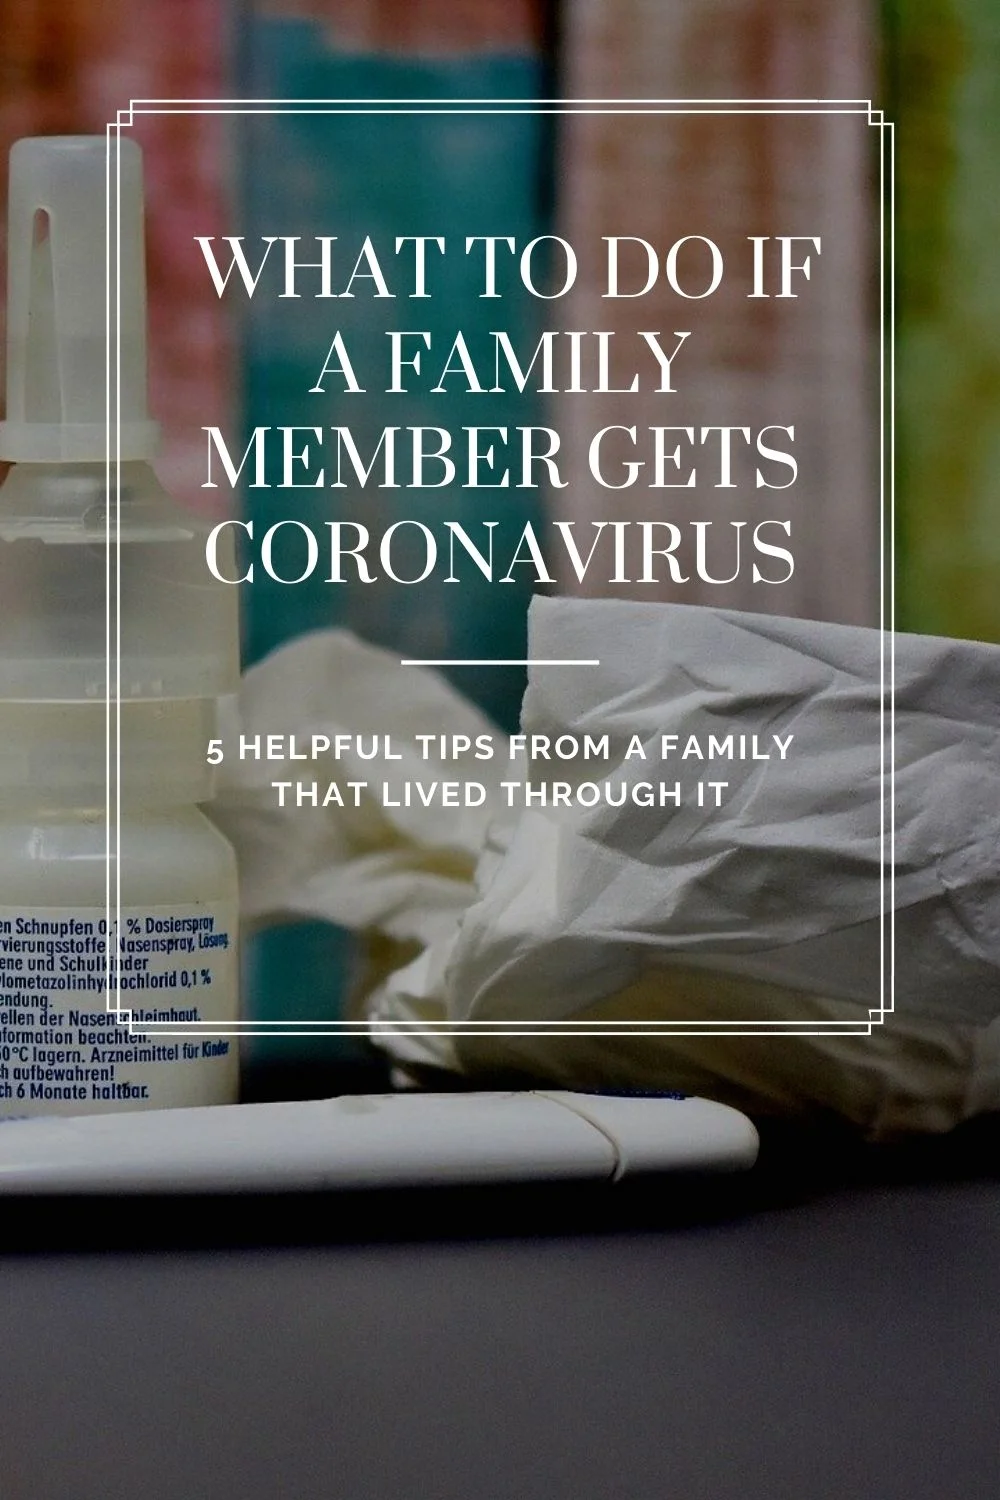 5 helpful tips on what to do if a family member gets covid